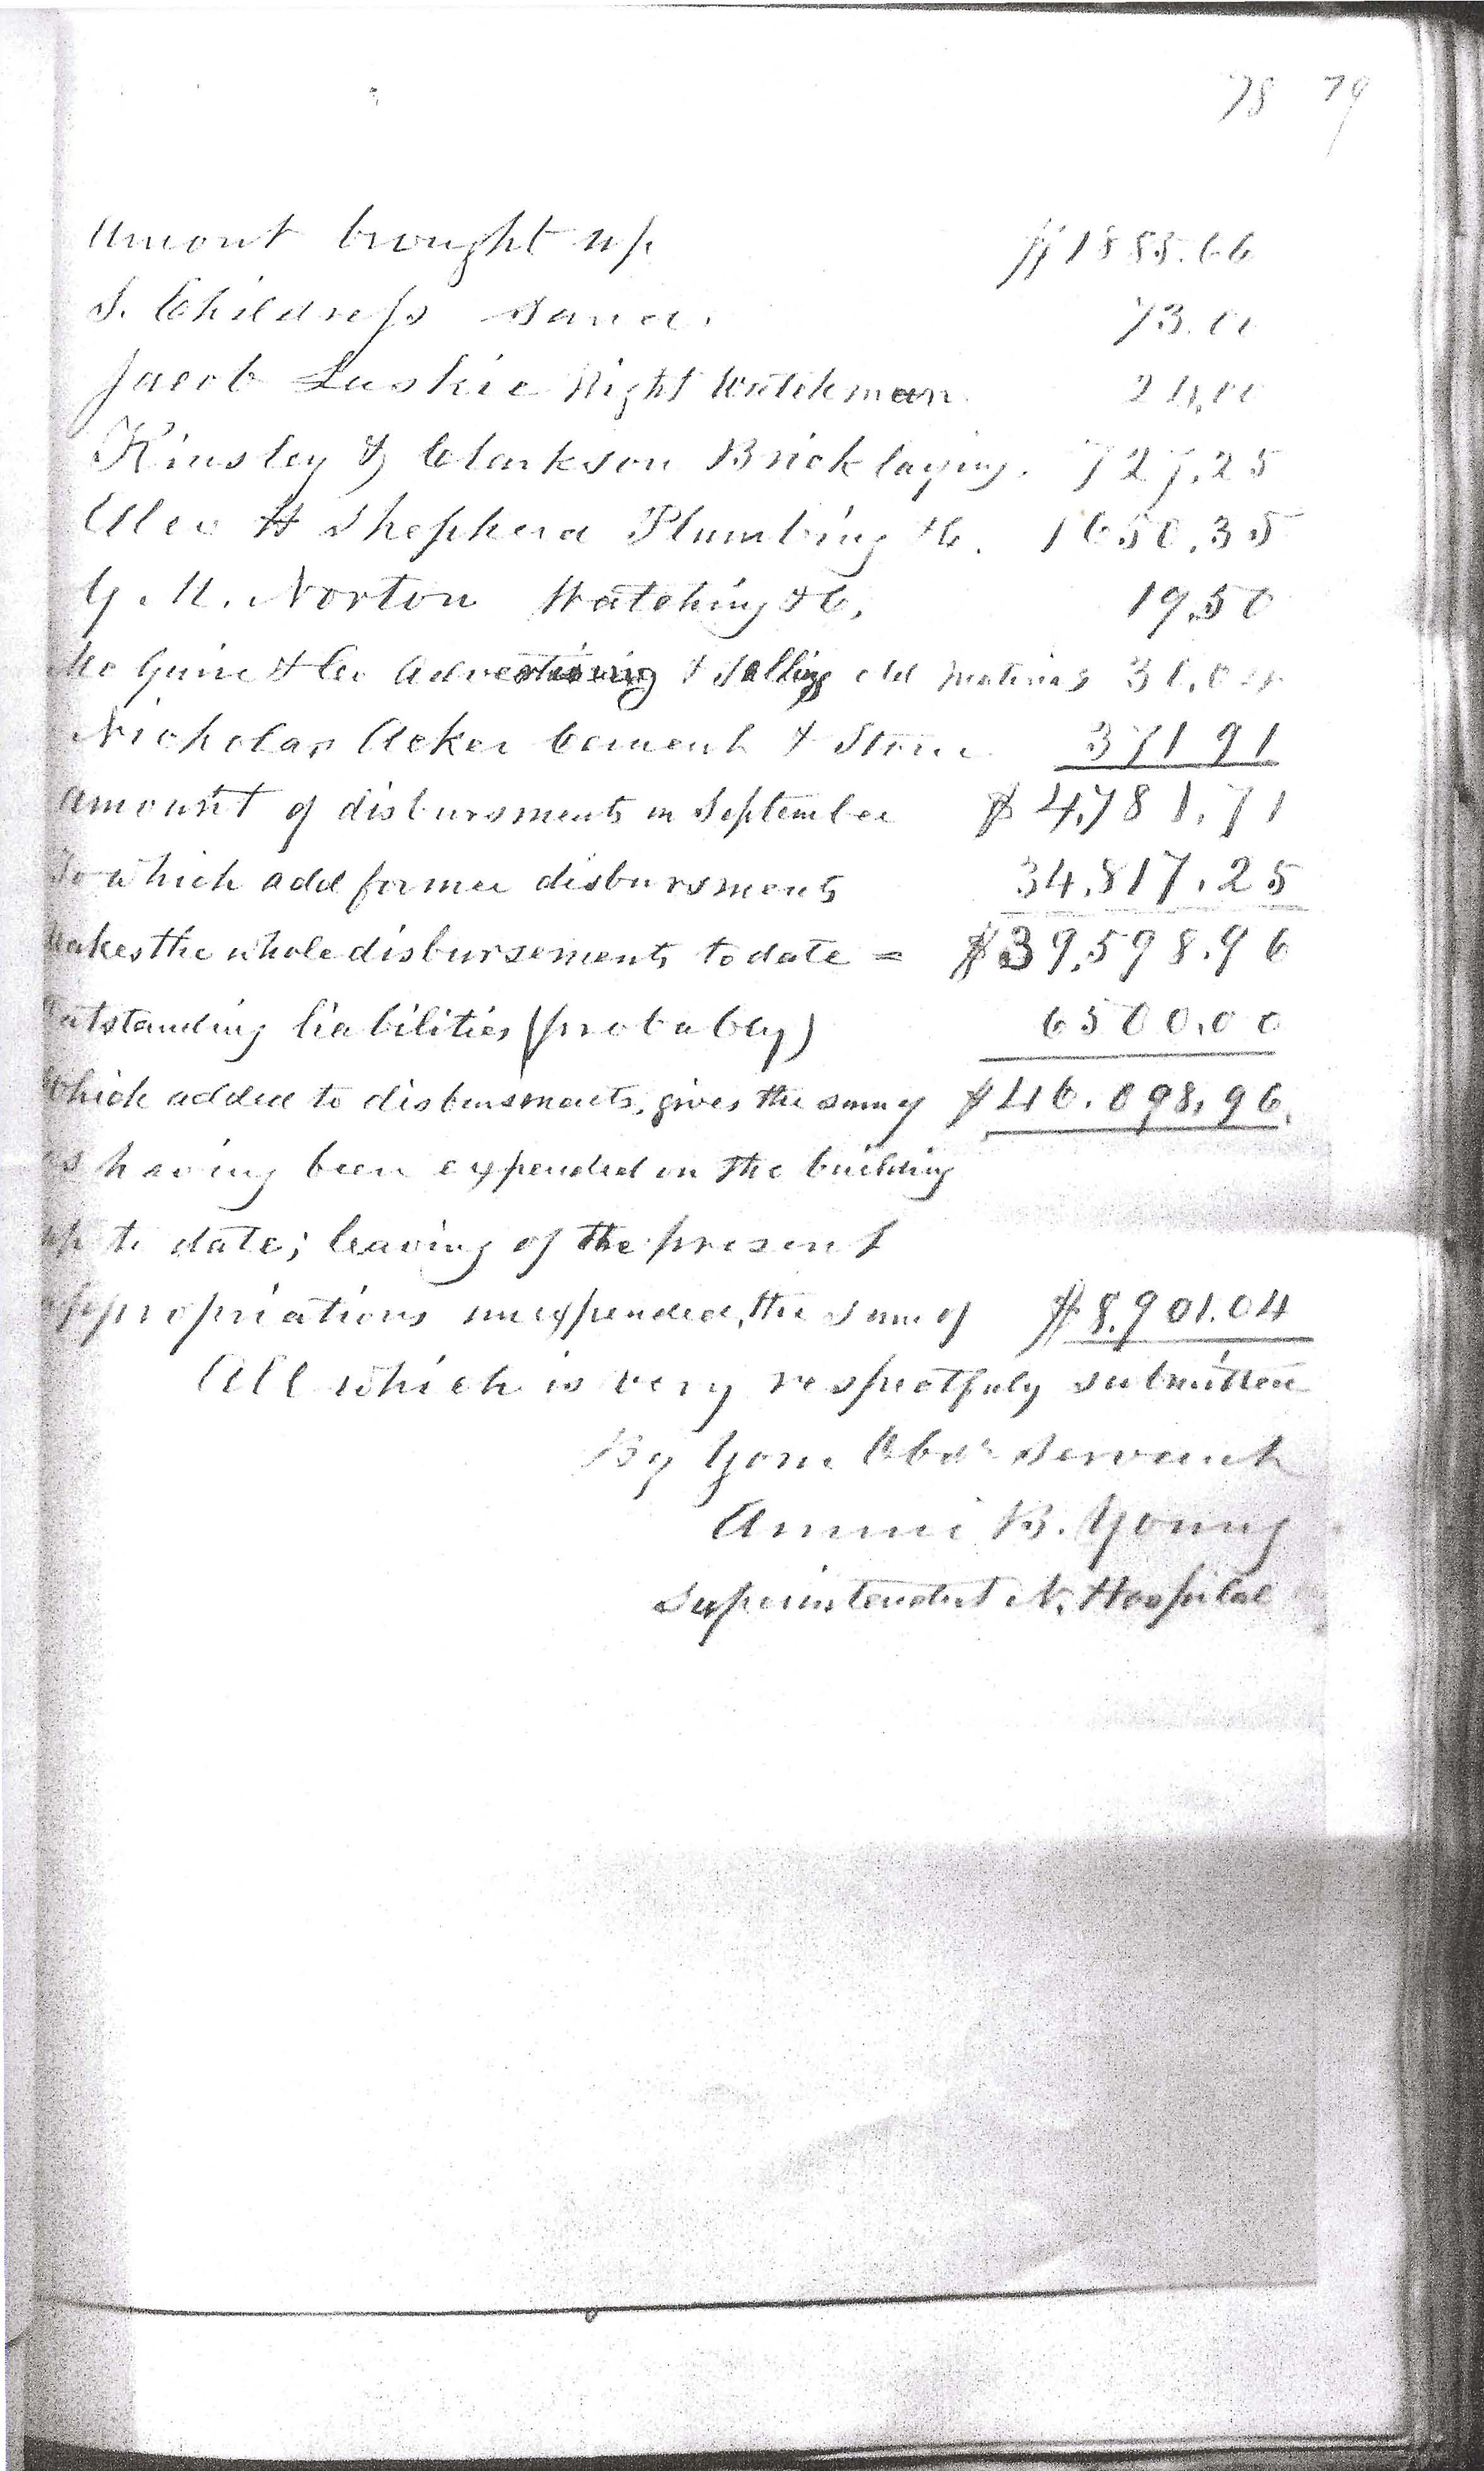 Monthly Report of the Superintendent of Construction, October 2, 1865, Page 4 of 4